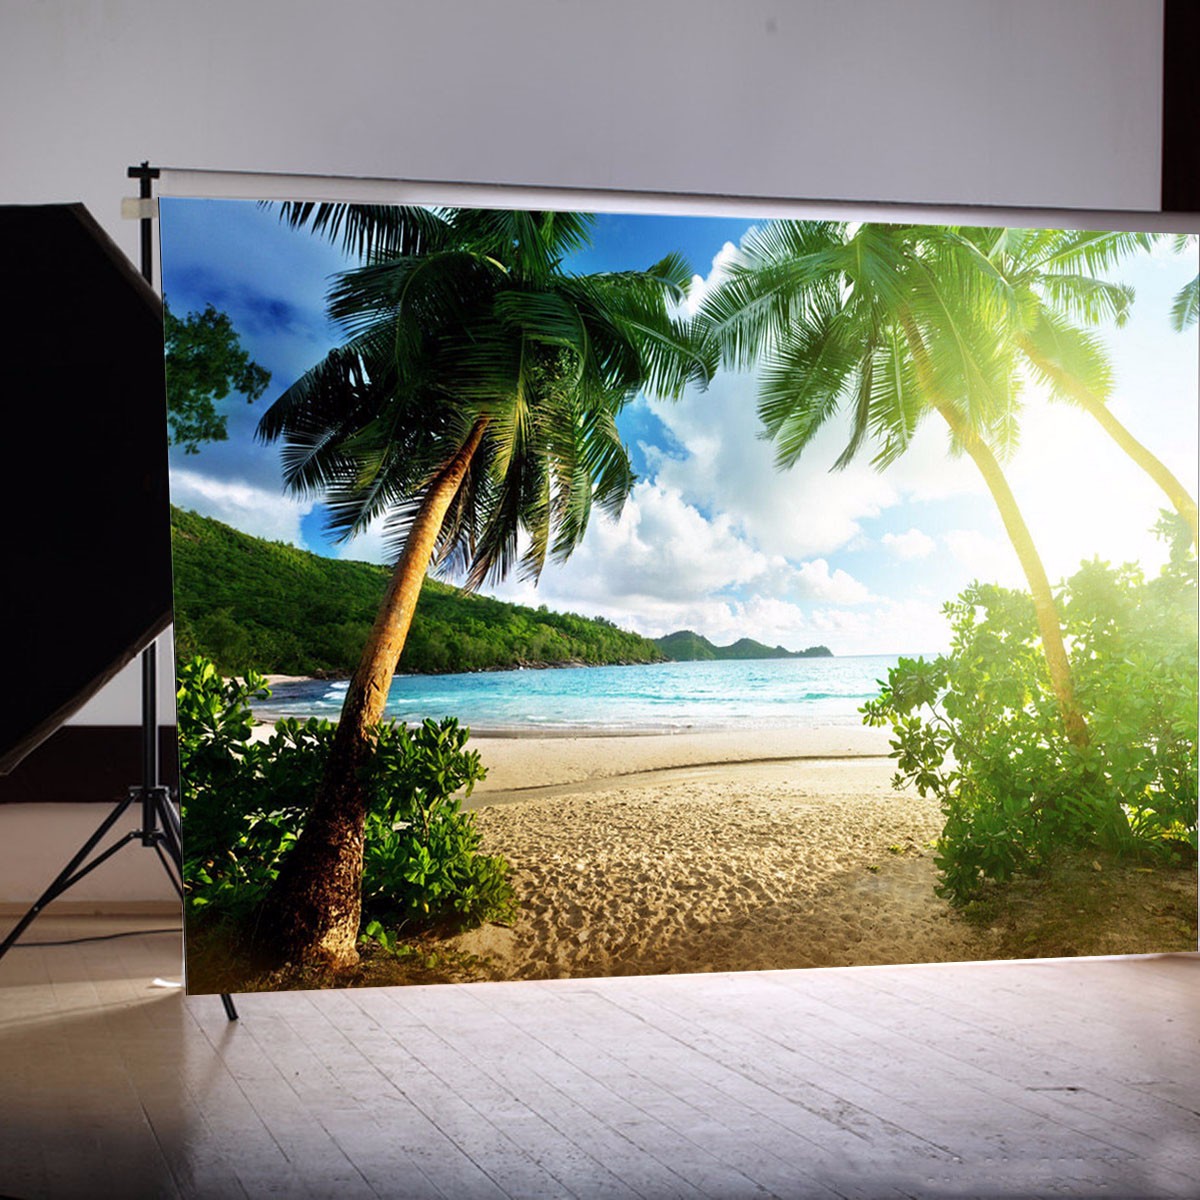 Outdoor Indoor Seascape Beach Dreamlike Photography Background Studio Props Backdrop 5x3FT A